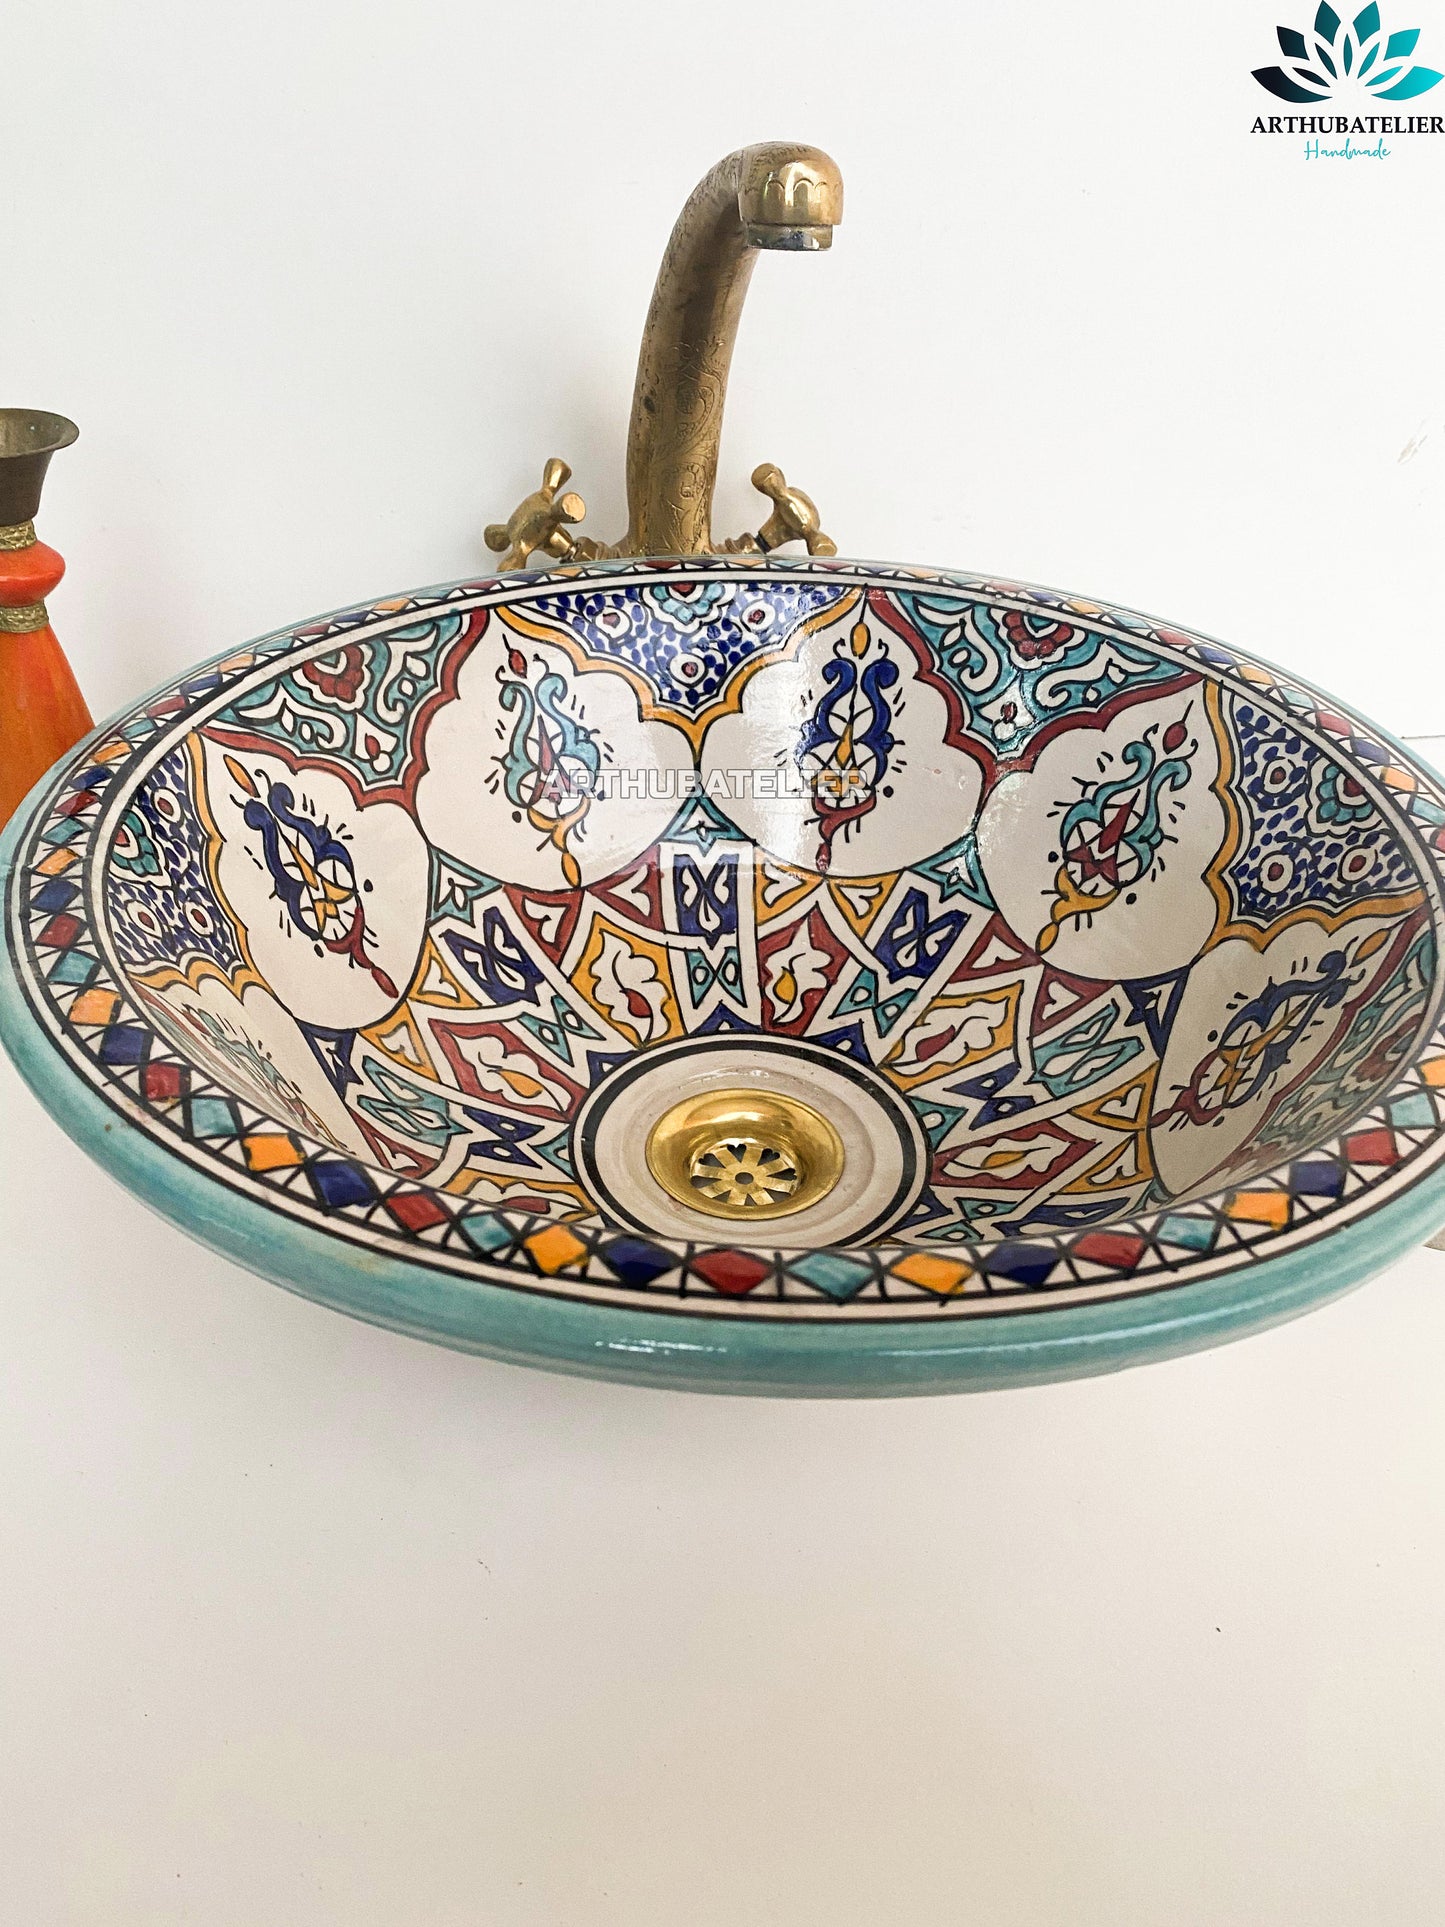 amazing colorful Bathroom washbasin sink made from ceramic 100% handmade hand painted, ceramic vessel sink built with mid century modern